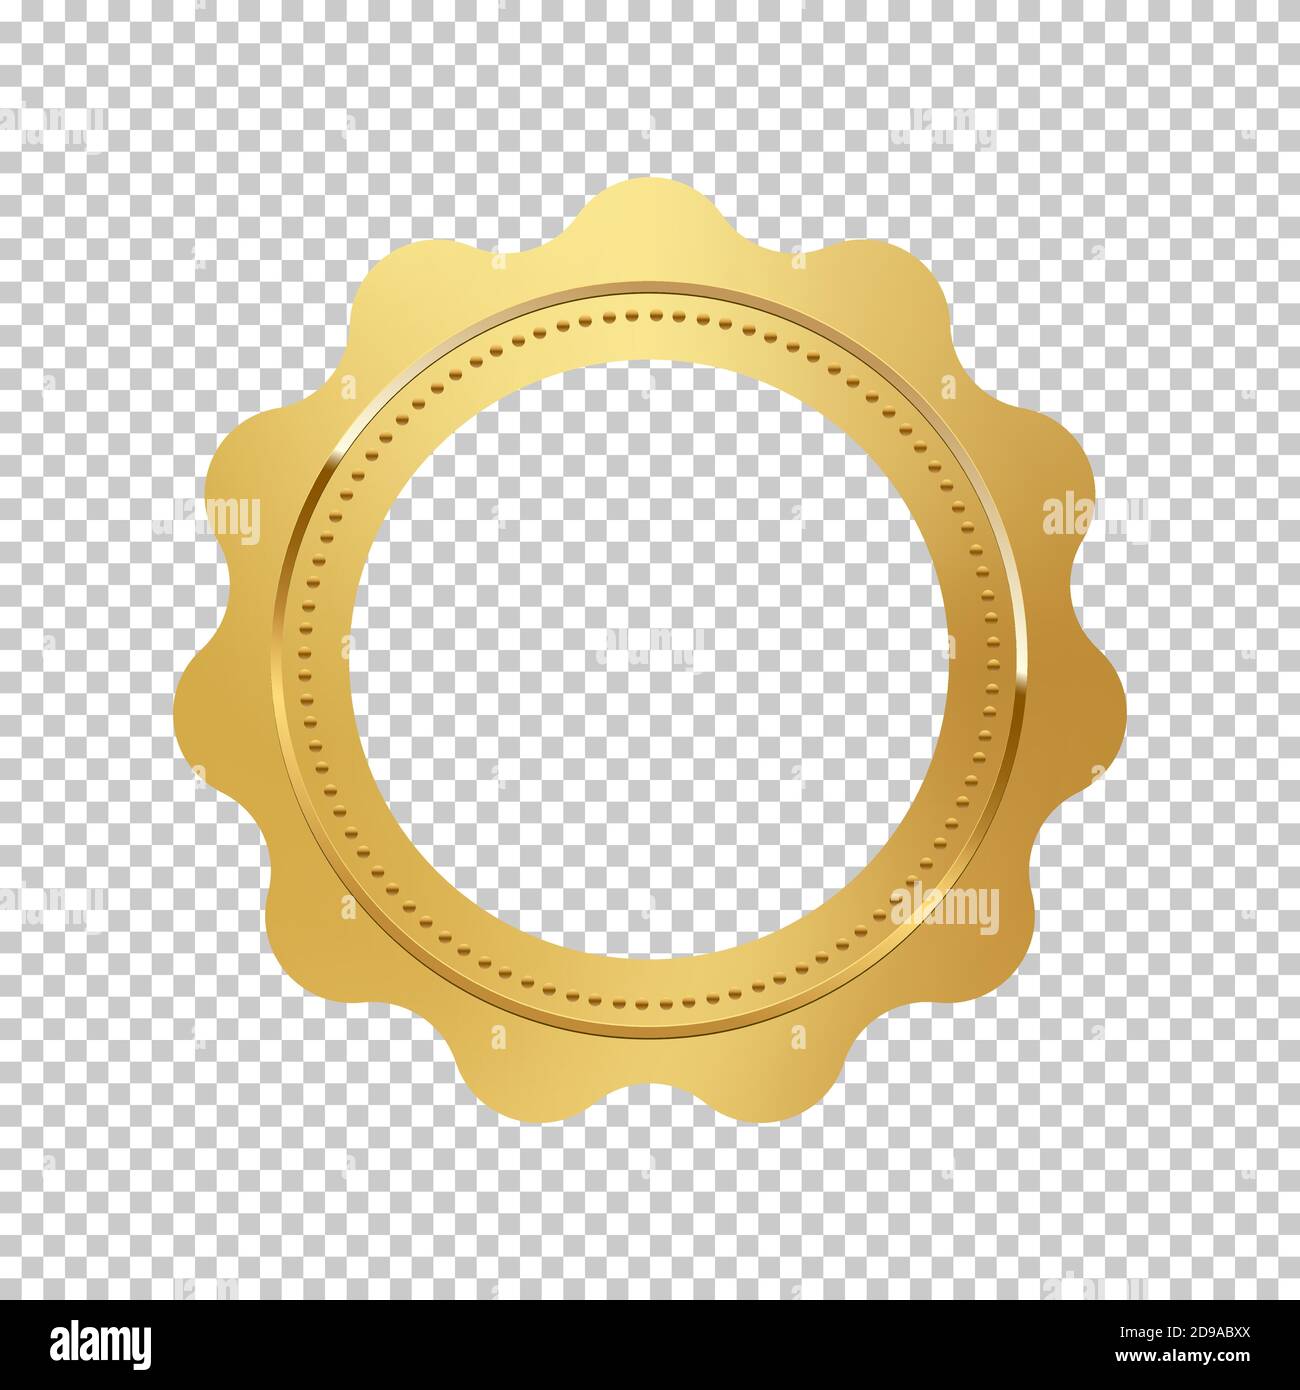 Shiny glowing round golden seal with empty space inside for text. Vector design element. Stock Vector